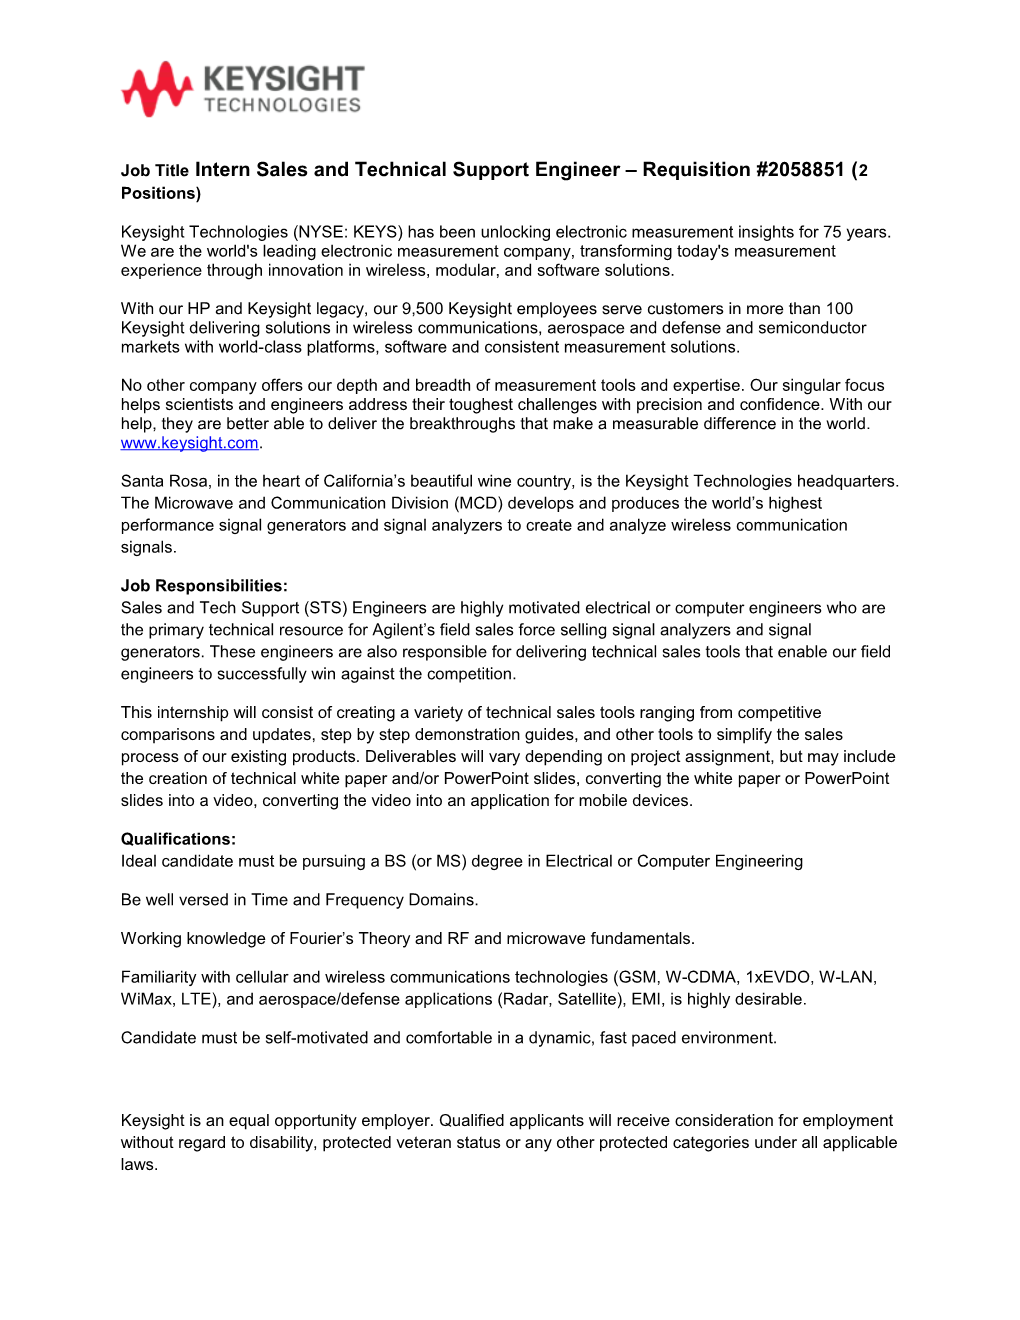 Job Titleintern Sales and Technical Support Engineer Requisition #2058851 (2 Positions)